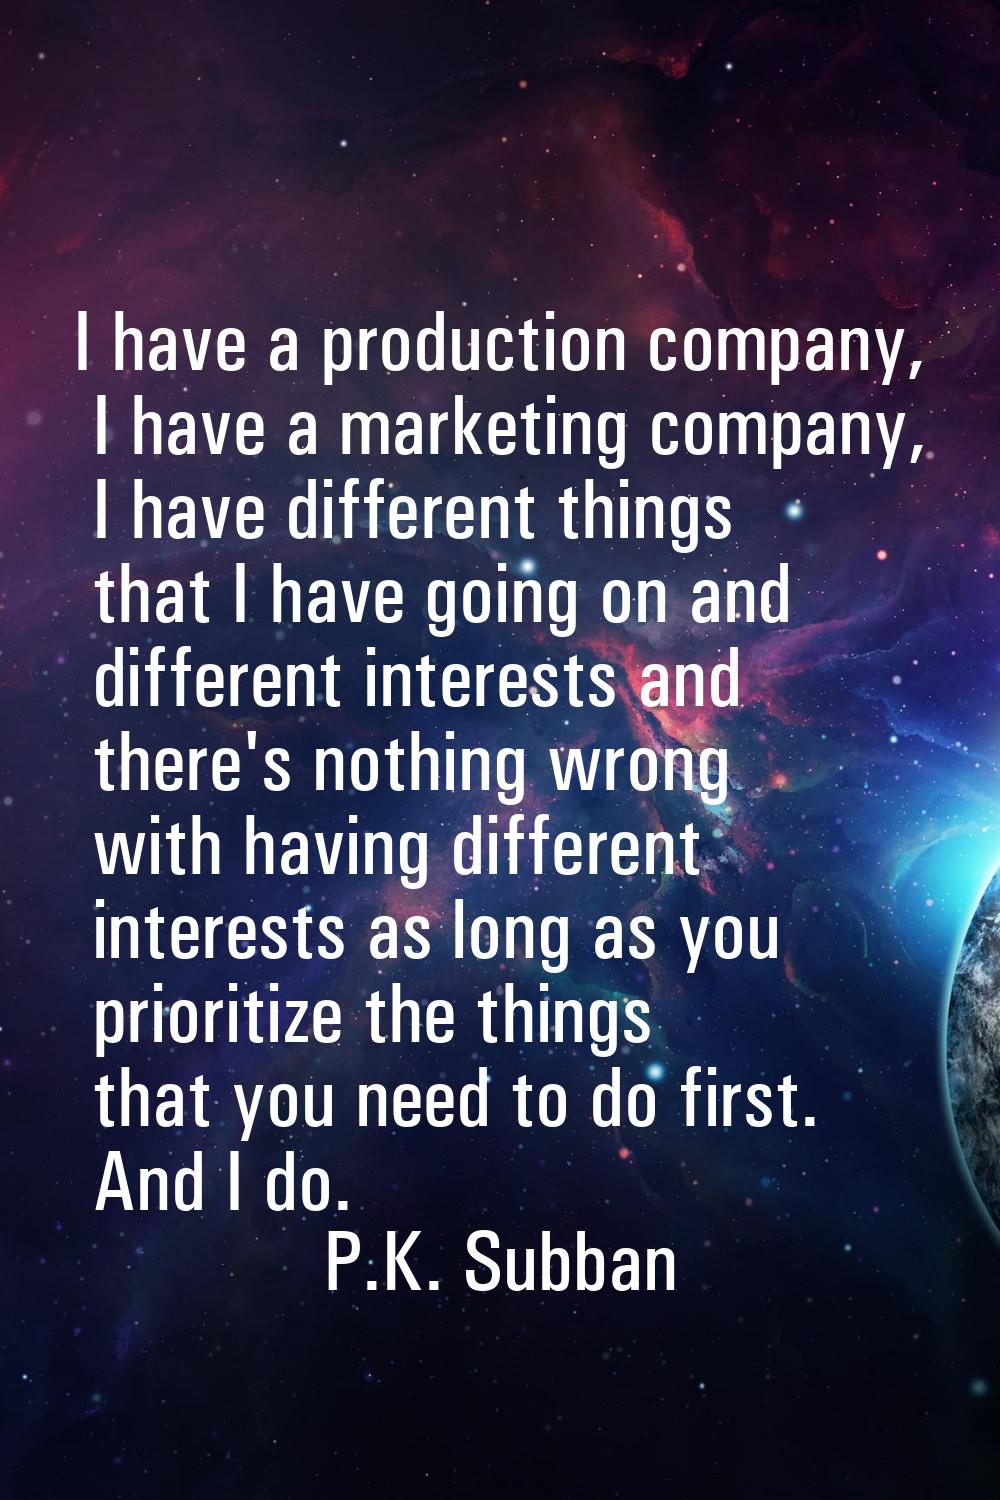 I have a production company, I have a marketing company, I have different things that I have going 